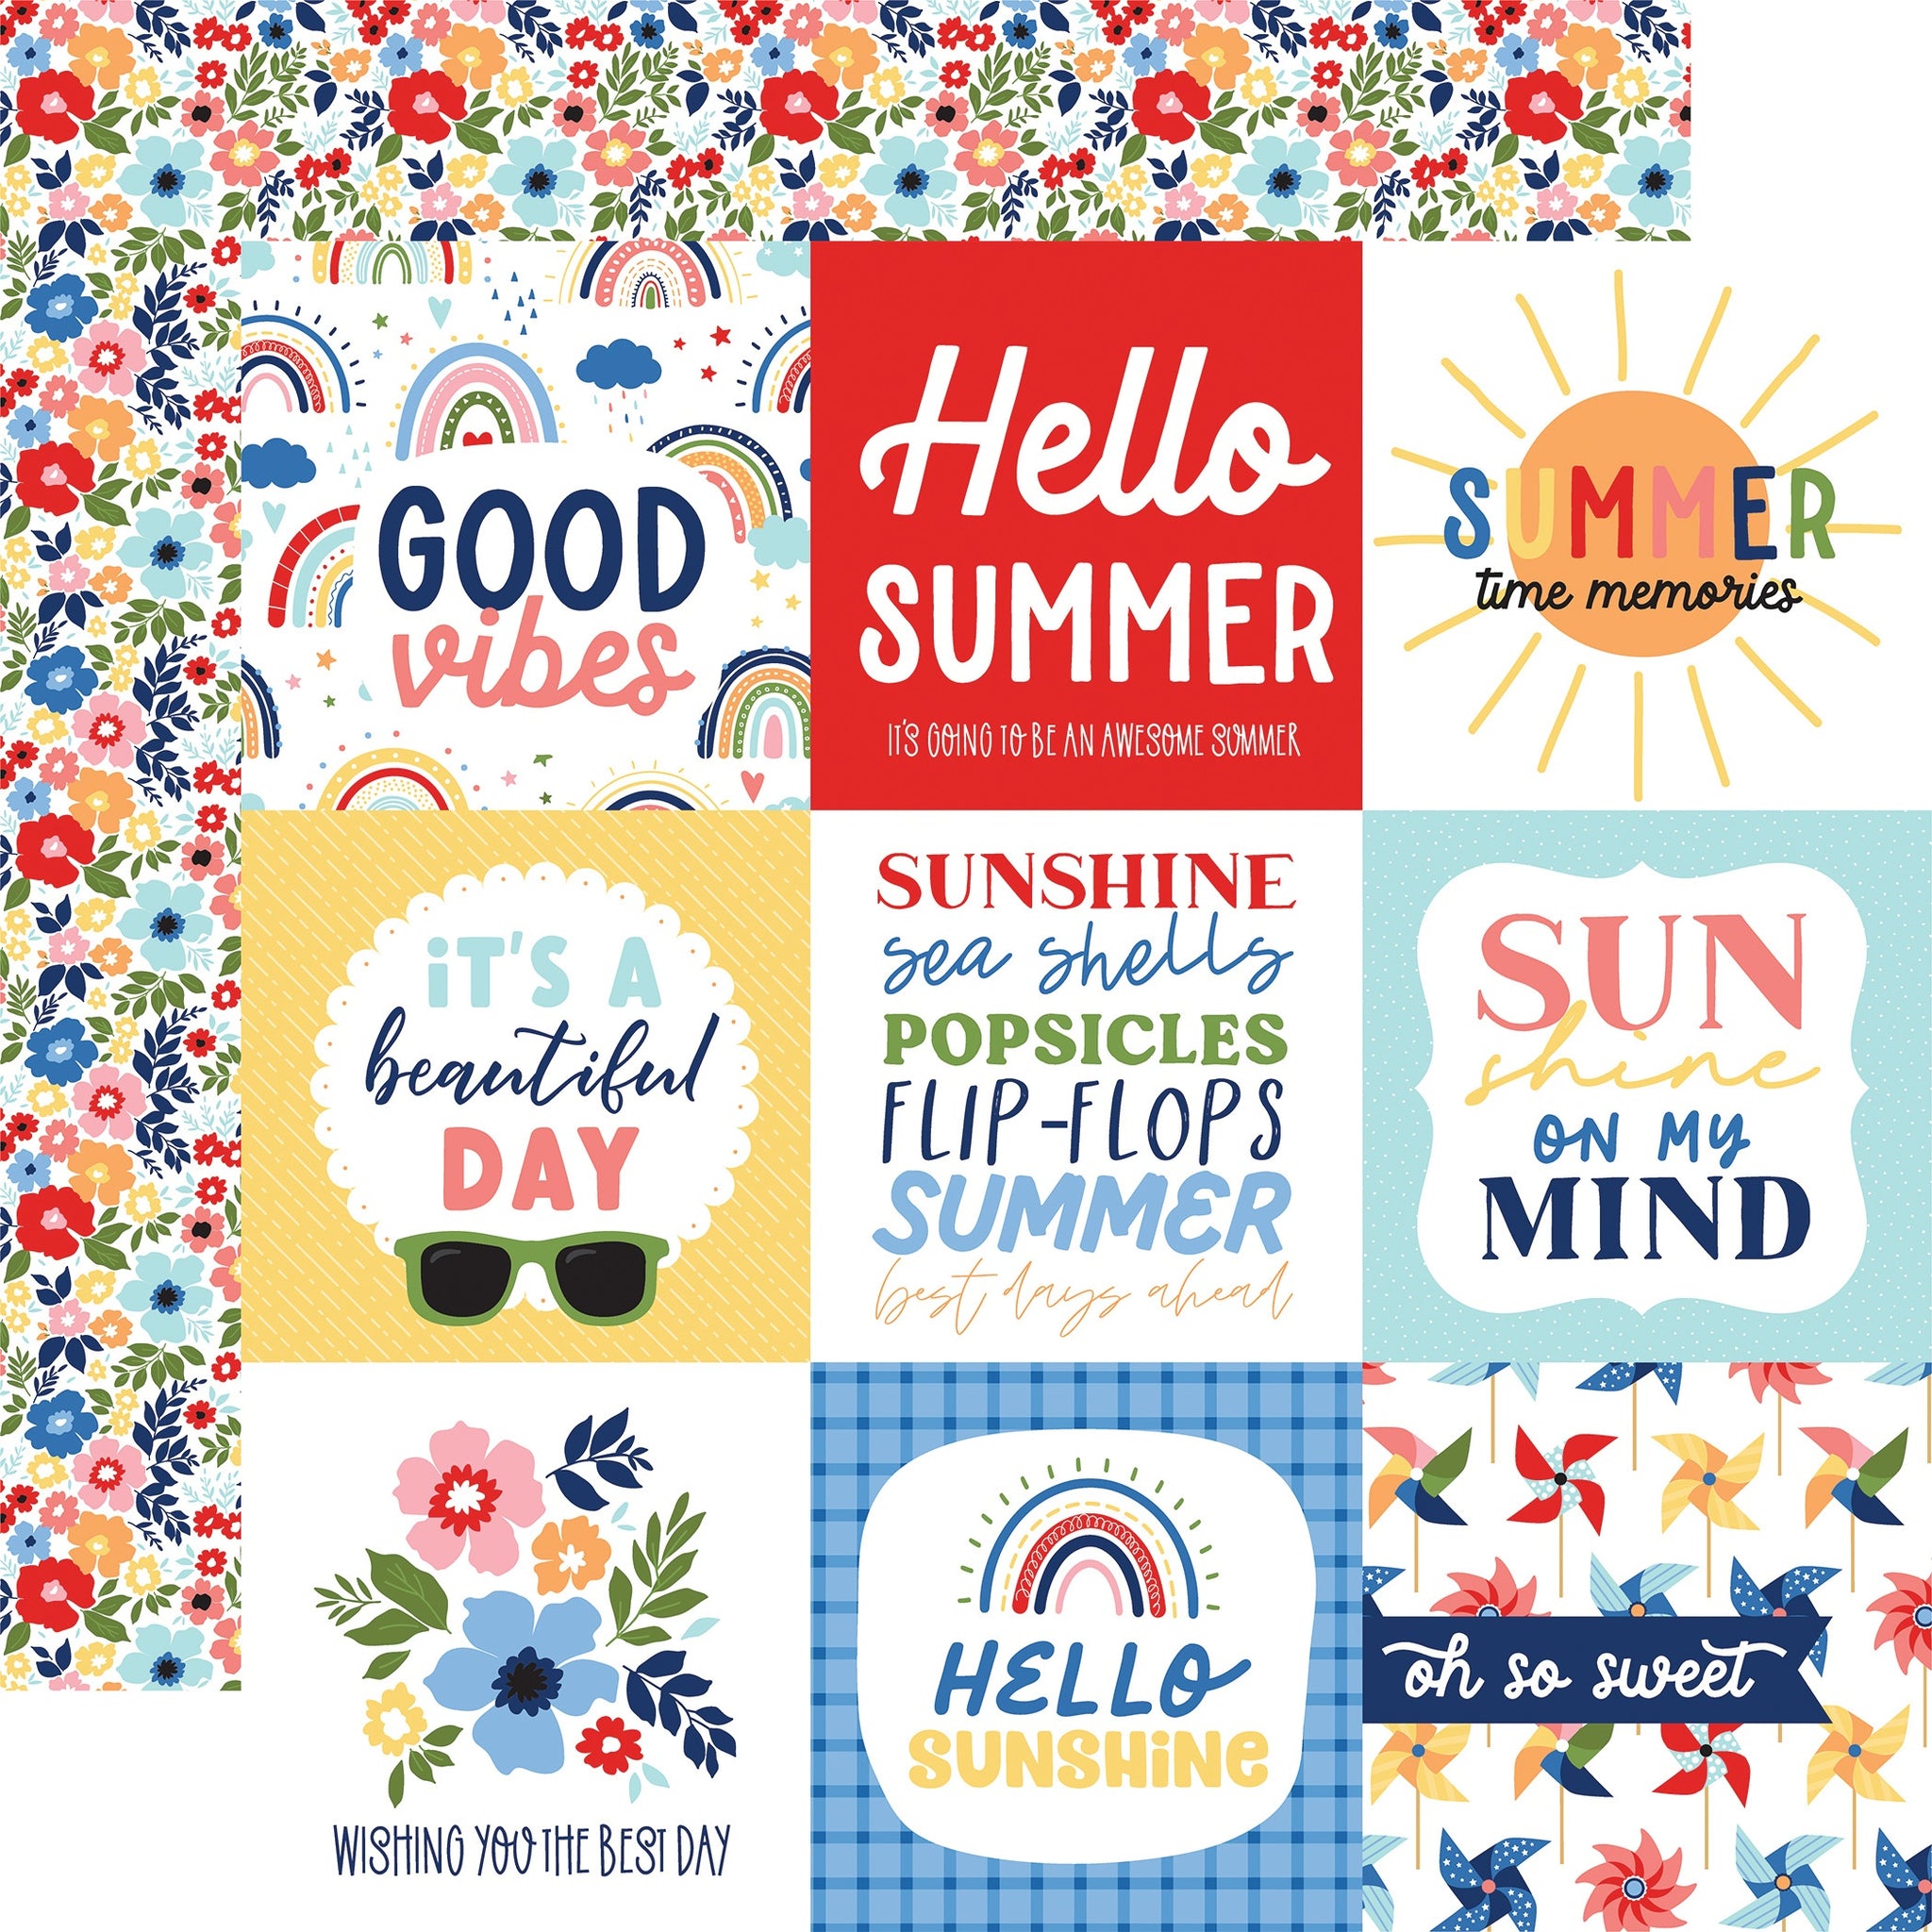 My Favorite Summer 4"x4" Journaling Cards 12x12 Patterned Paper